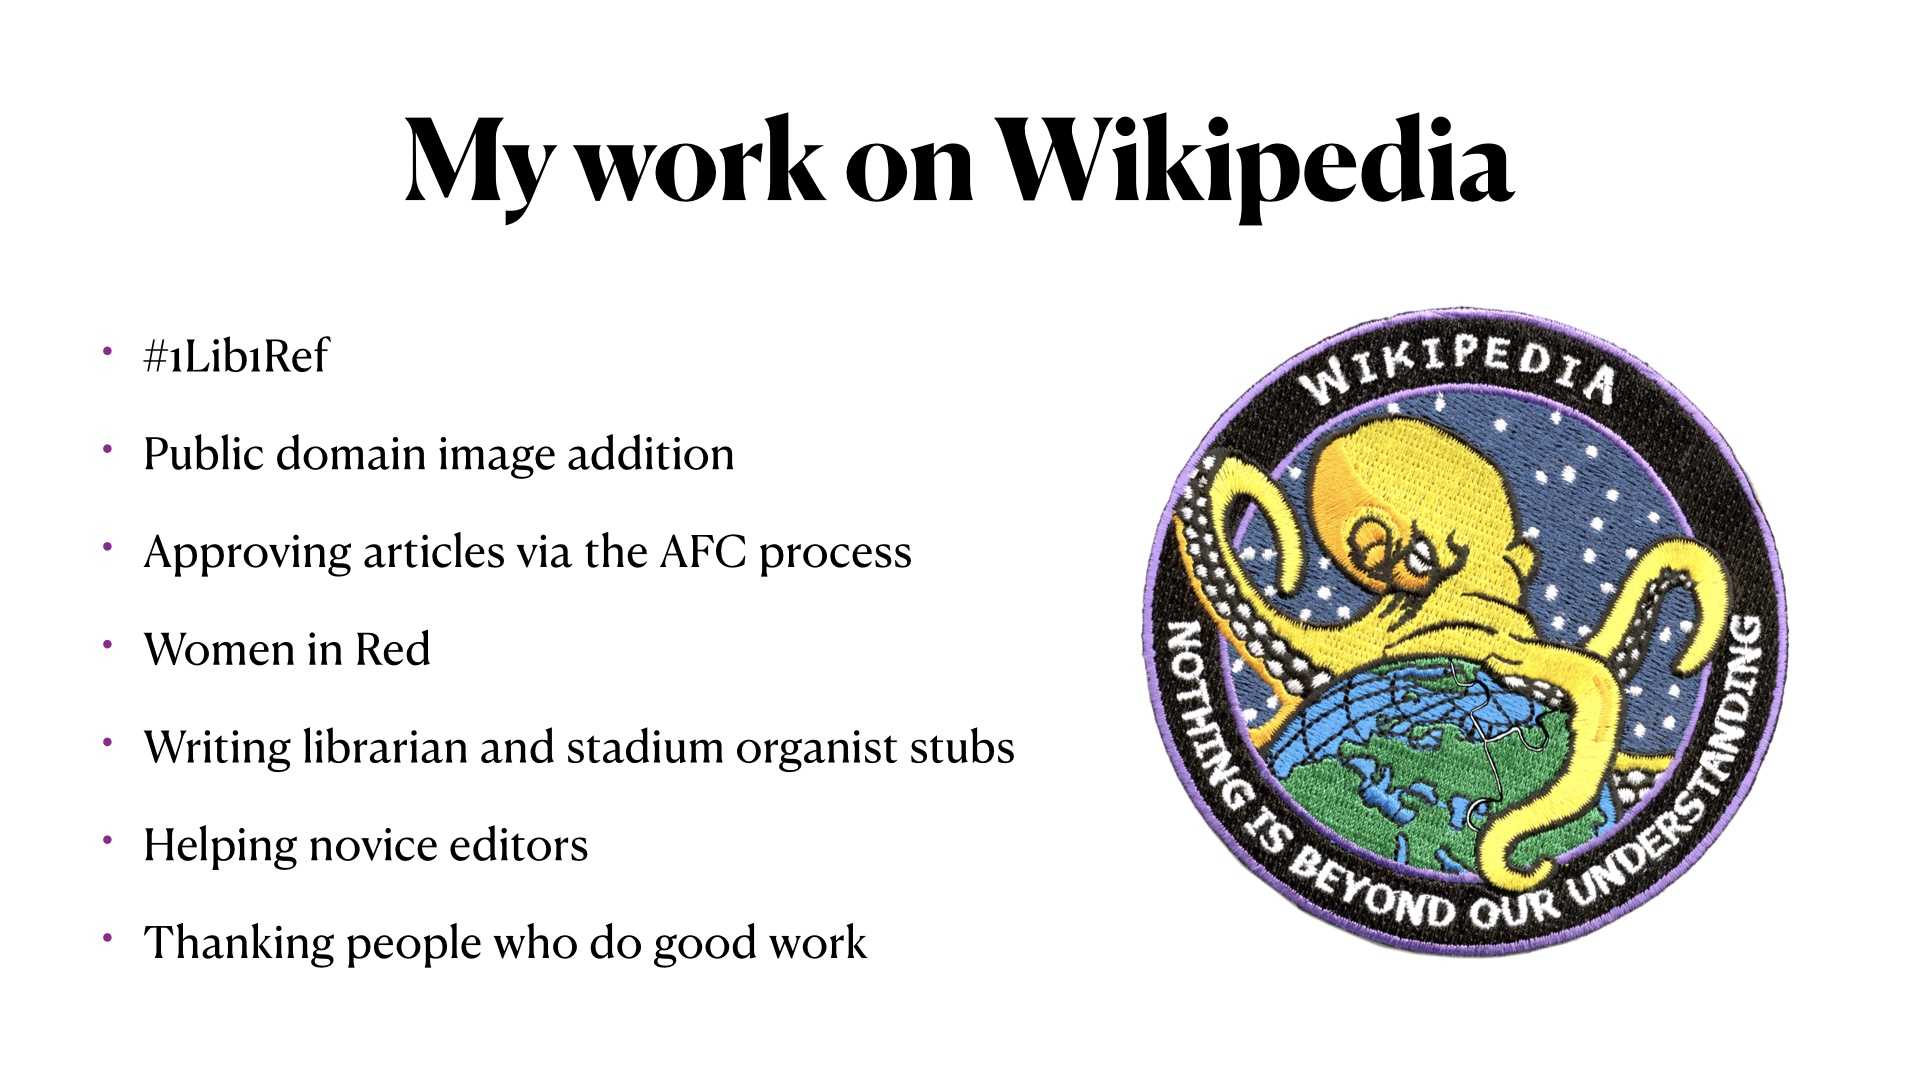 My work on Wikipedia: #1Lib1Ref
Public domain image addition, 
Approving articles via the AFC process, 
Women in Red, 
Writing librarian and stadium organist stubs, 
Helping novice editors, 
Thanking people who do good work